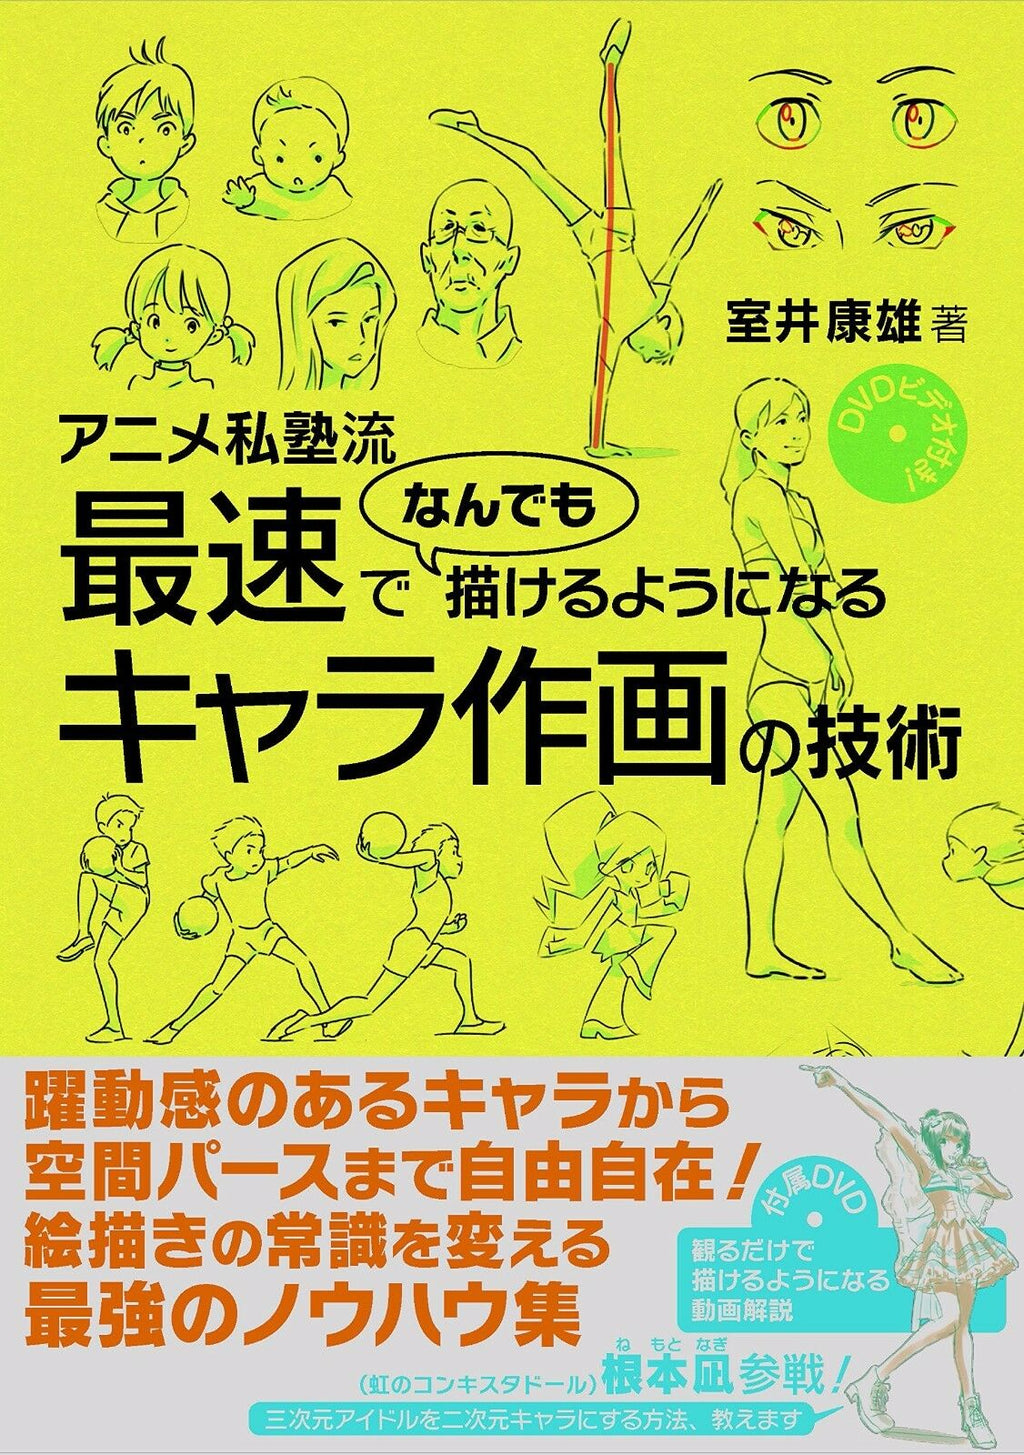 NEW' How To Draw Manga Anime Character Technique Book by Yasuo Muroi | JAPAN